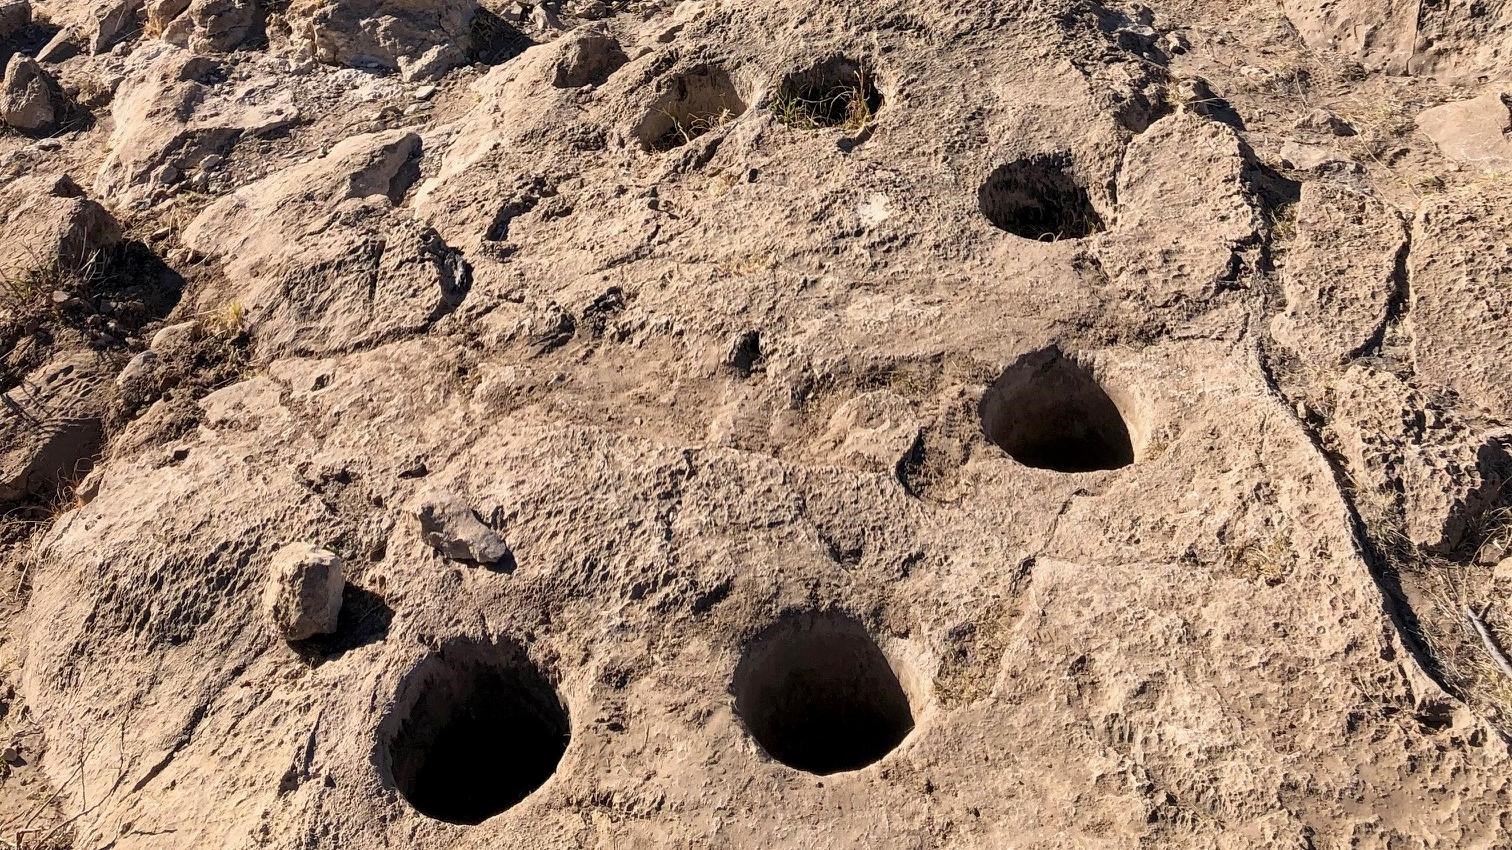 Six holes about five inches in diameter are laid out in a circle in a limestone ledge.